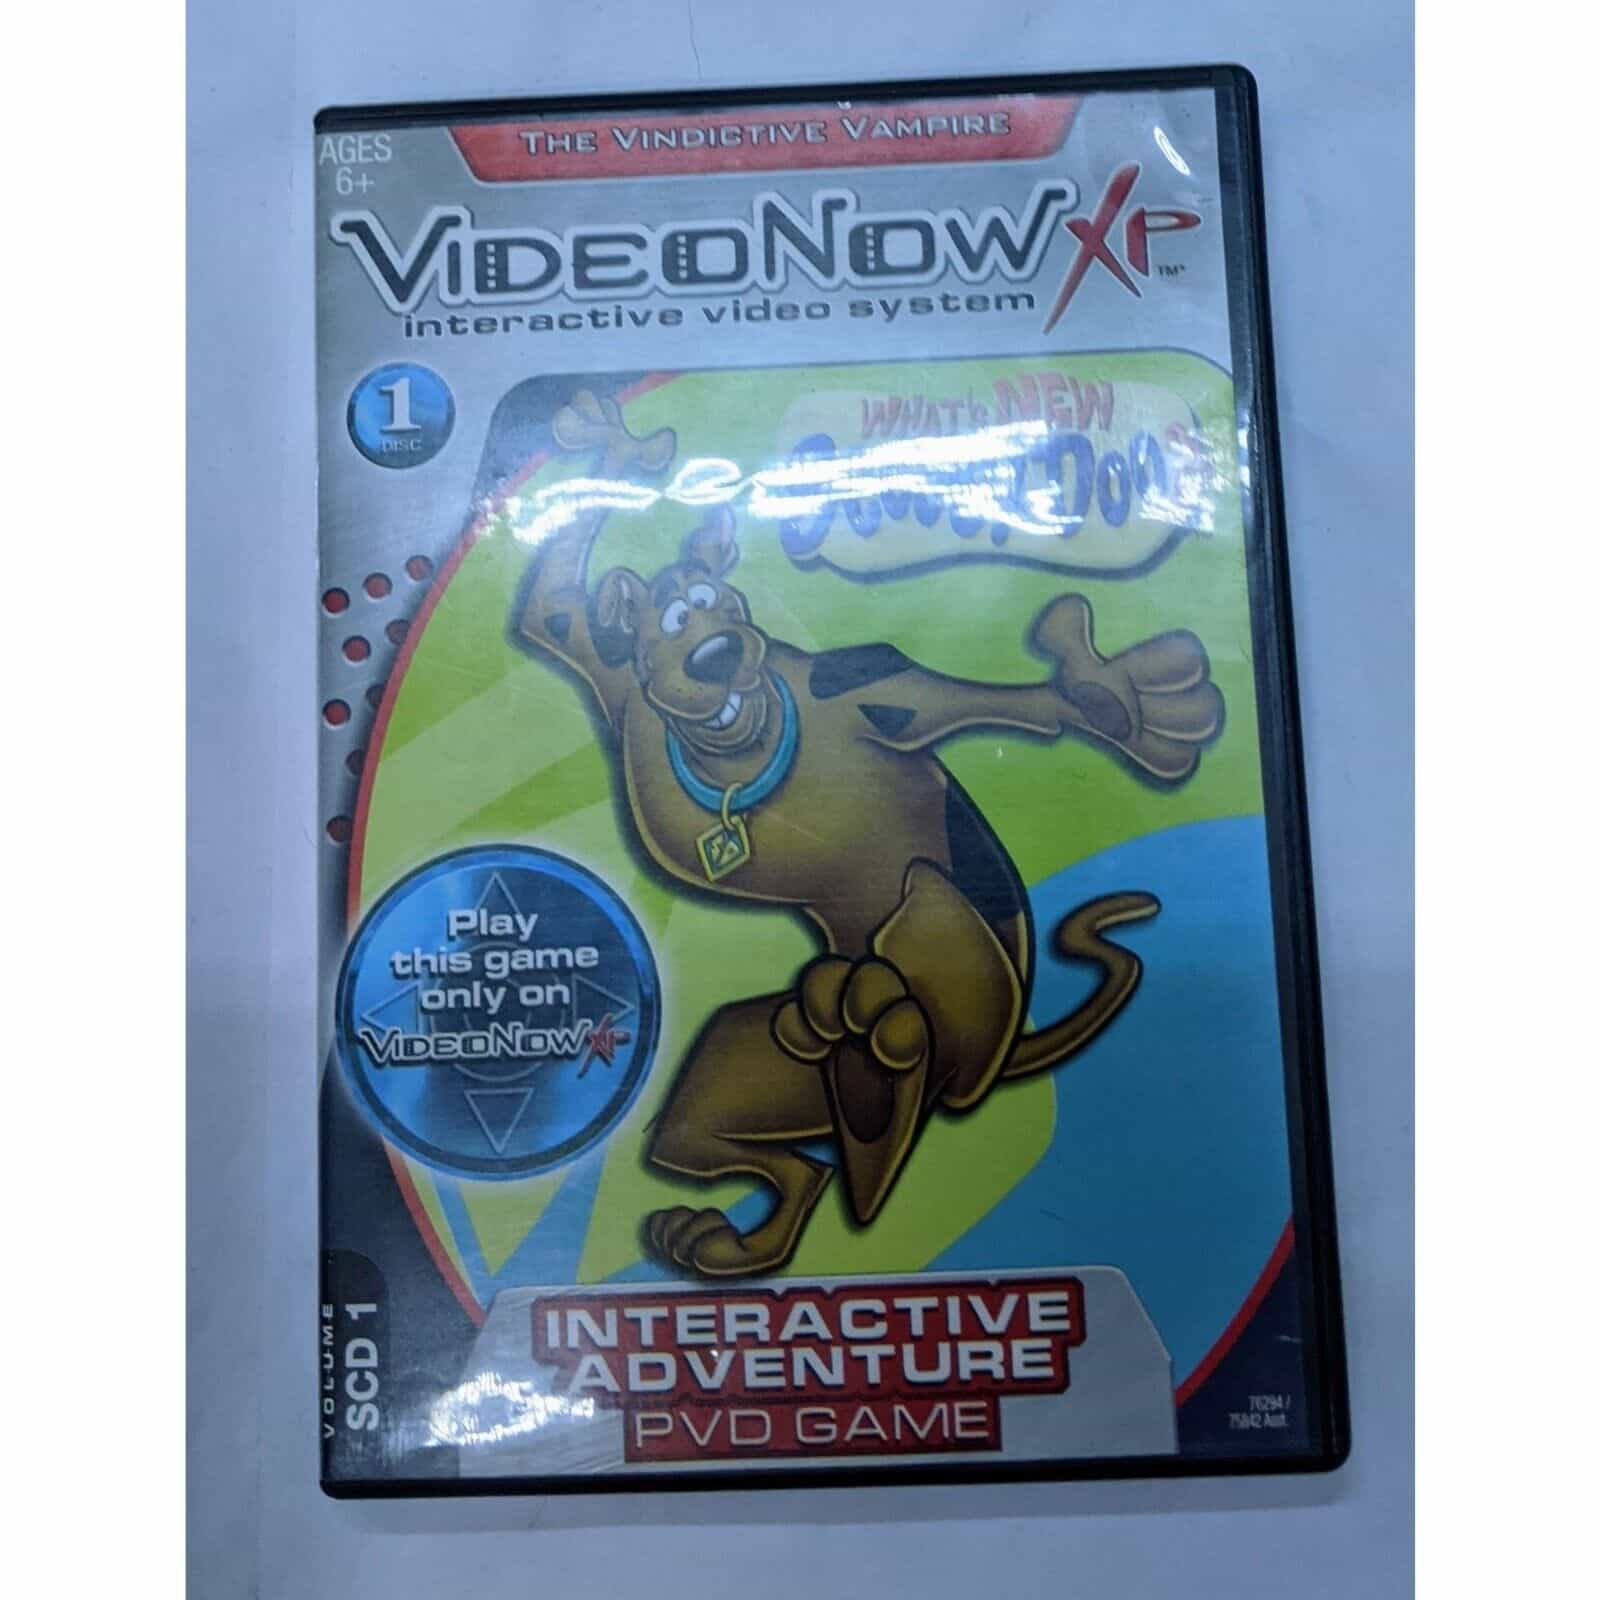 What’s New Scooby-Doo? The Vindictive Vampire Interactive Adventure PVD Game